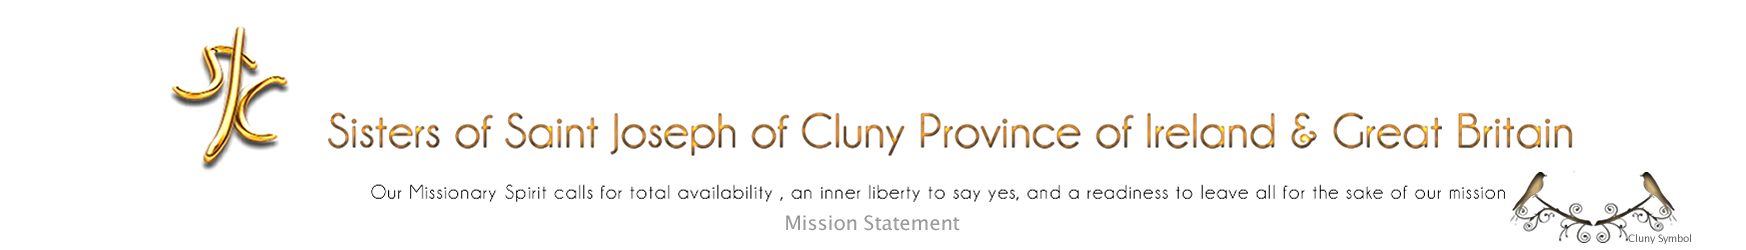 cluny mission statement